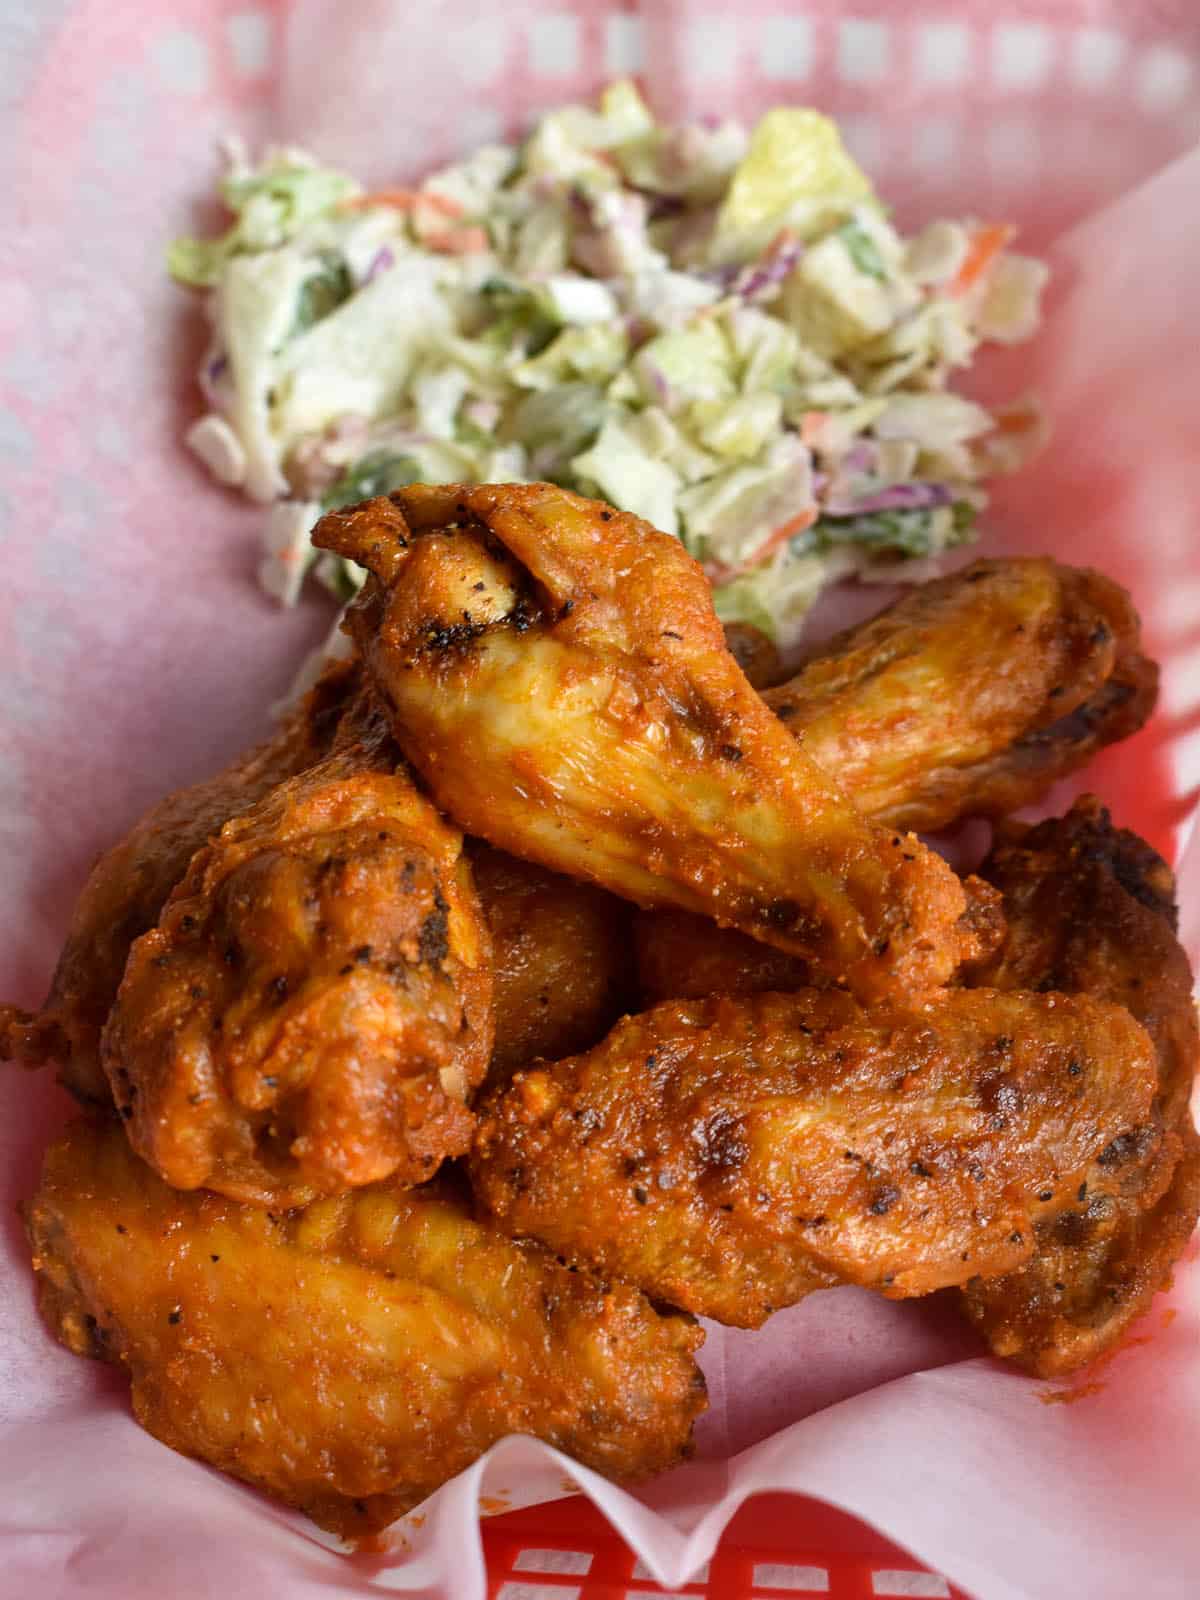 buffalo chicken wings in a food service basket with salad